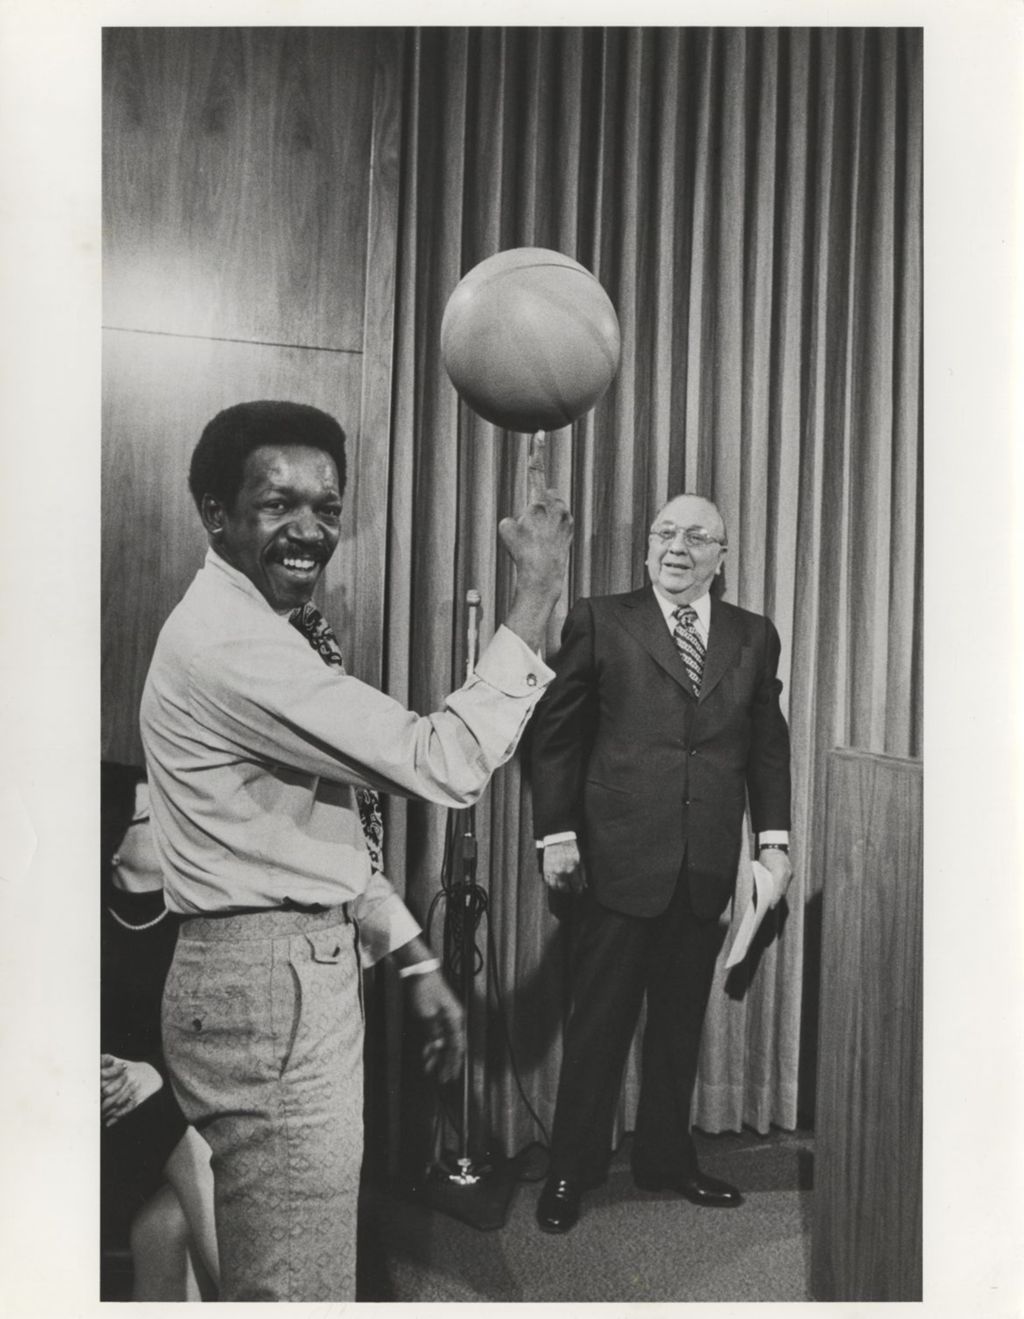 Miniature of Richard J. Daley with man spinning basketball at City Hall